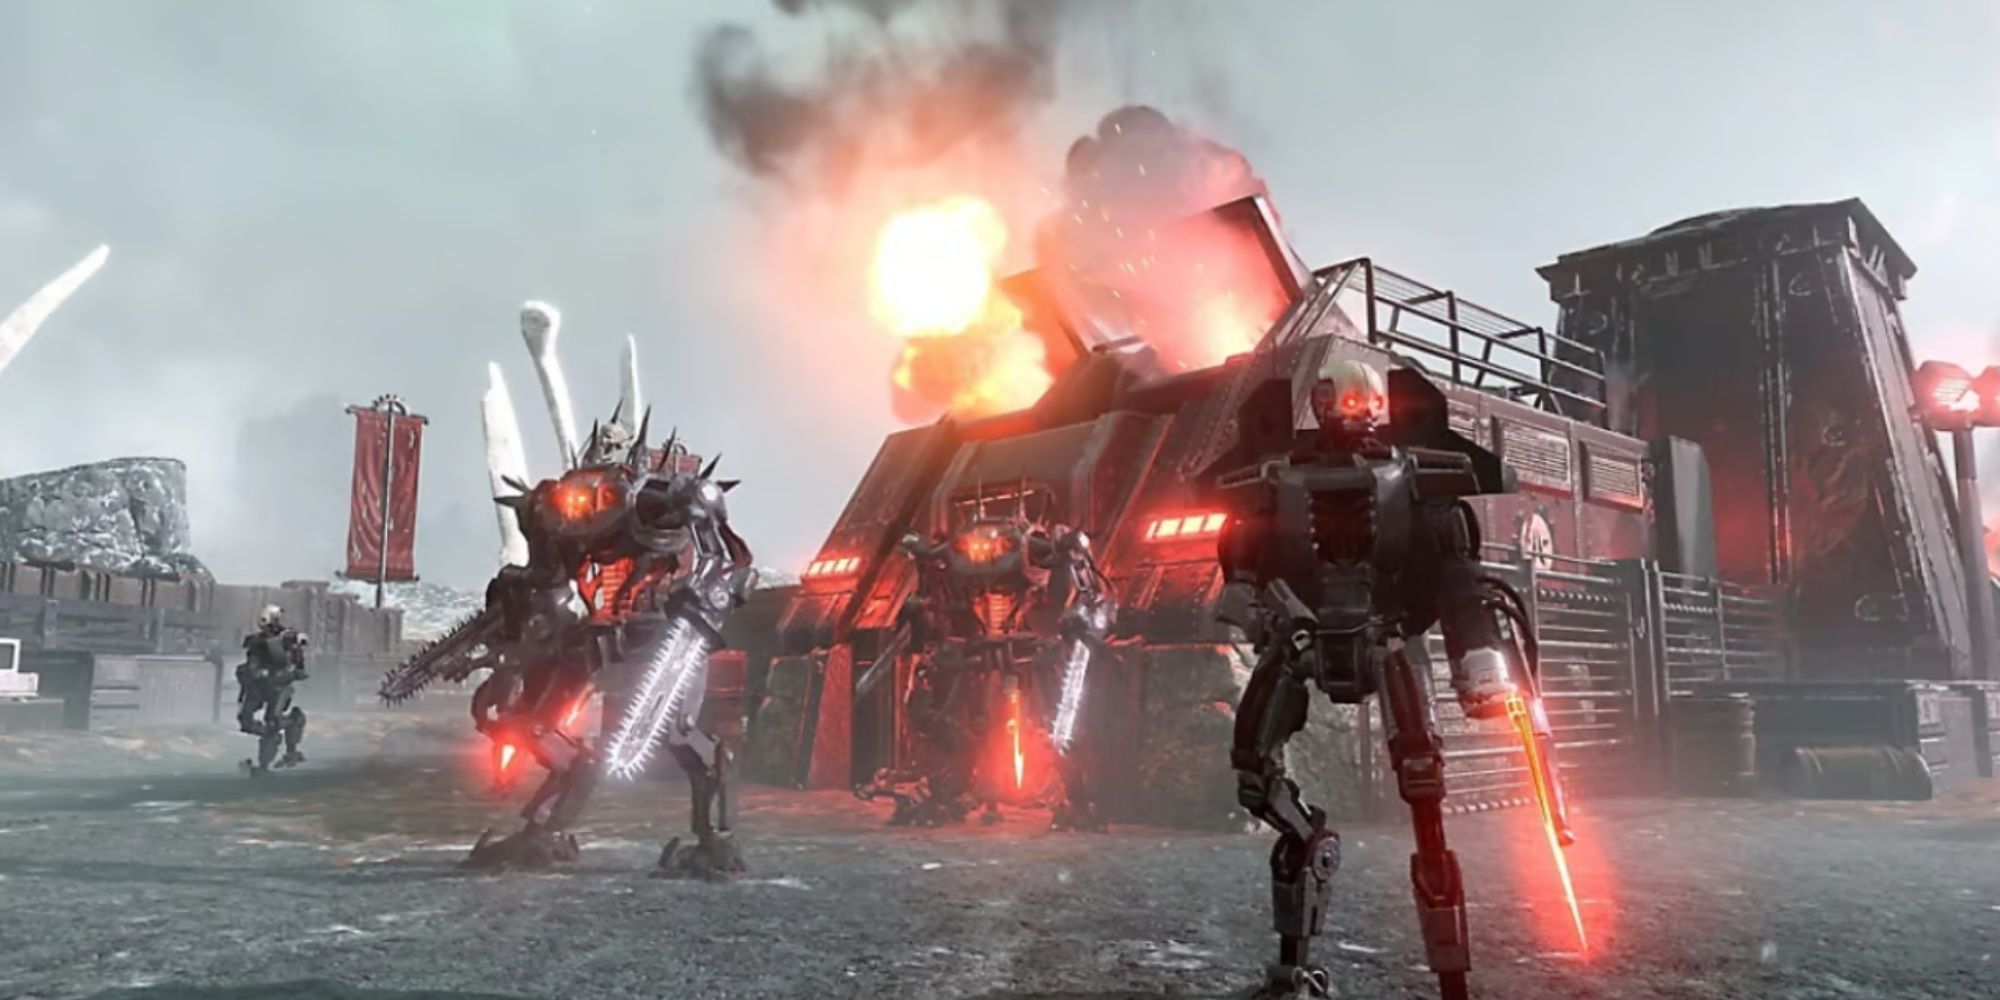 Several types of Automaton enemies in front of a building